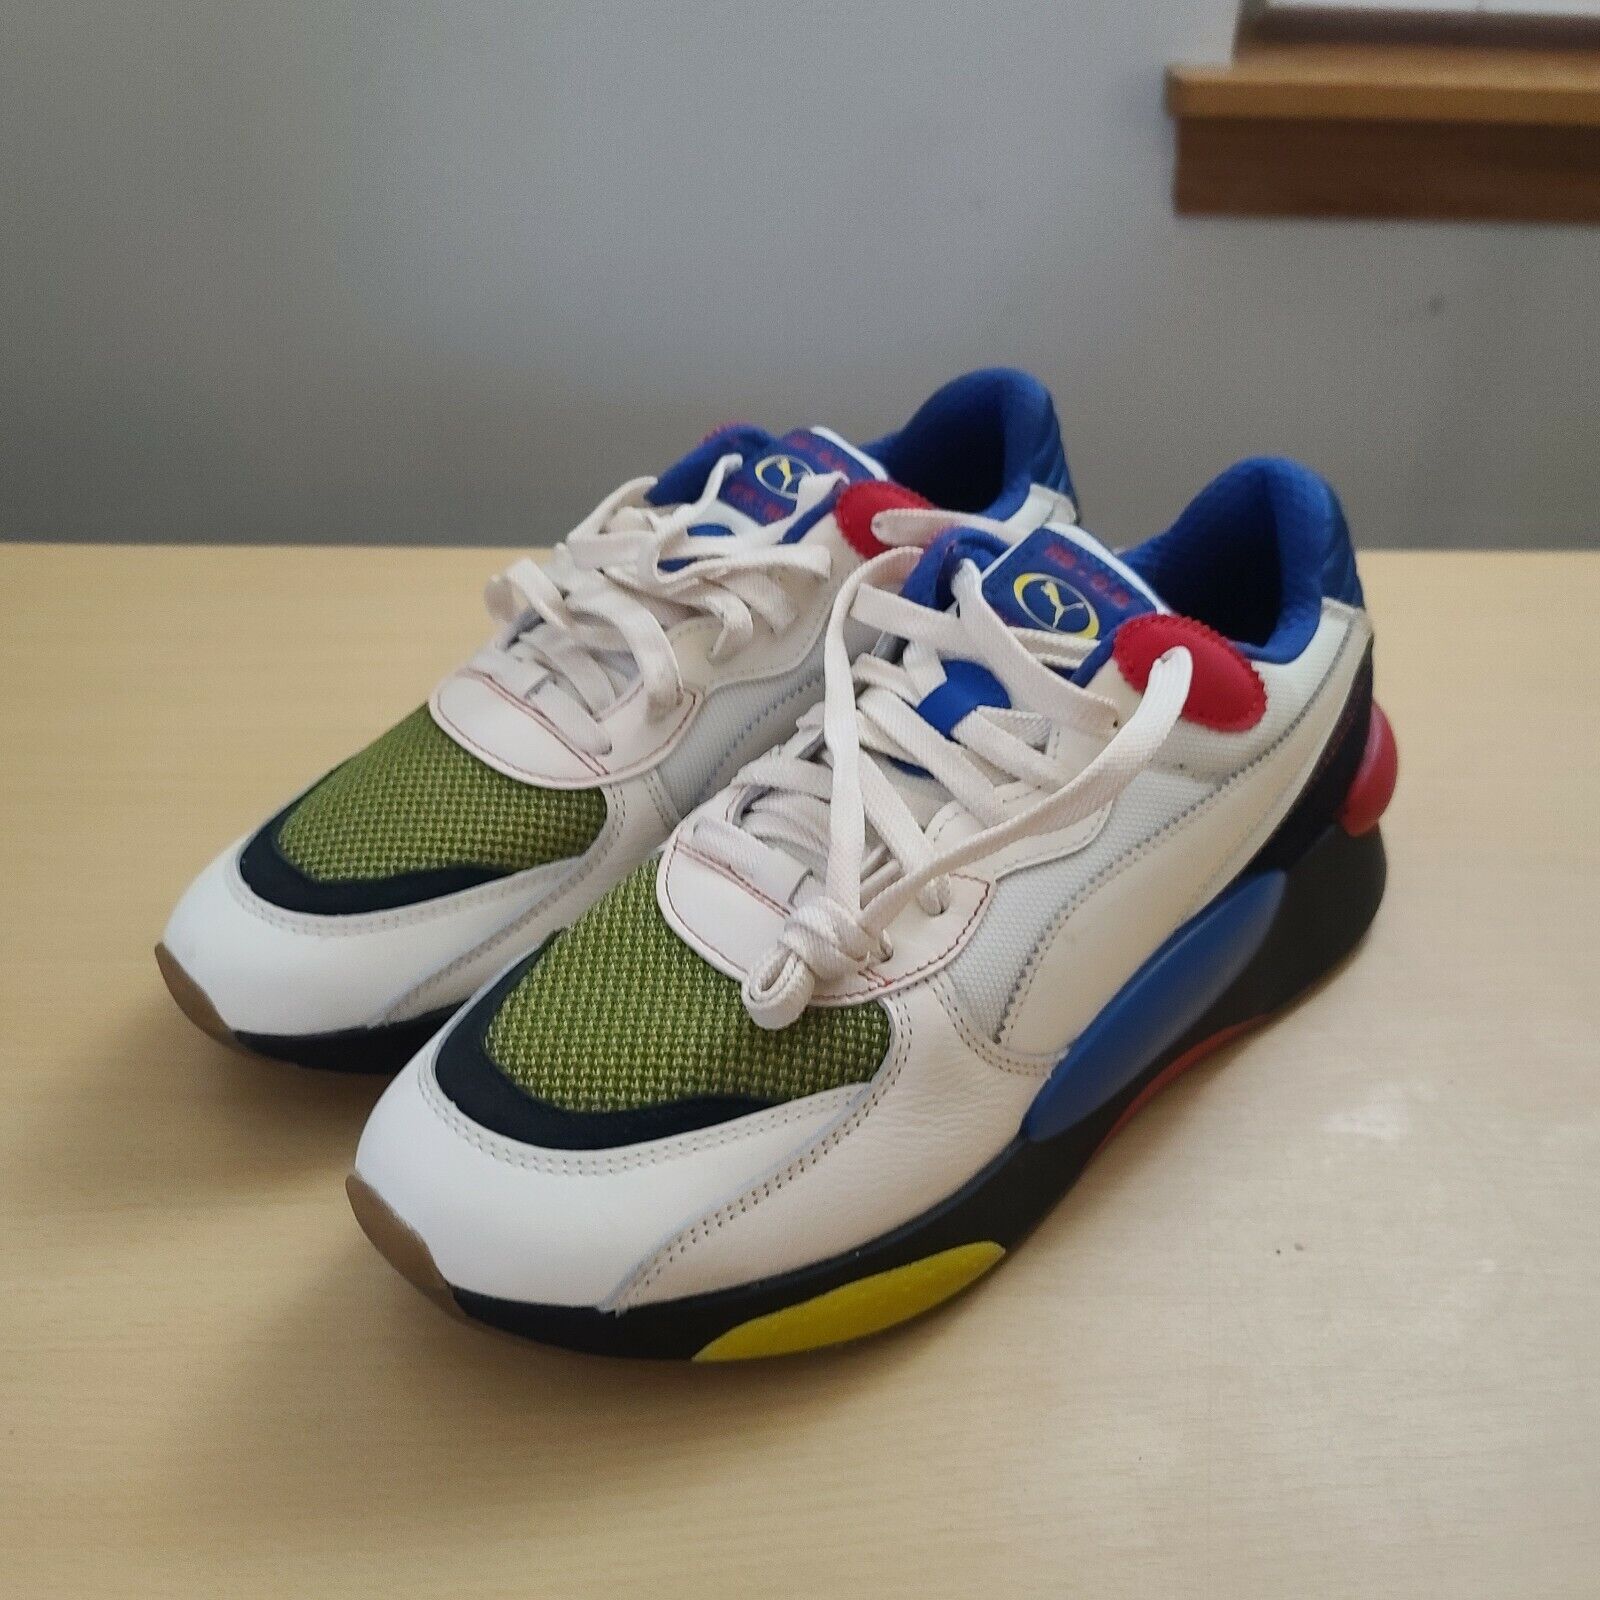 beef Respectful Method Size 11 - PUMA RS 9.8 Subvert Natural for sale online | eBay